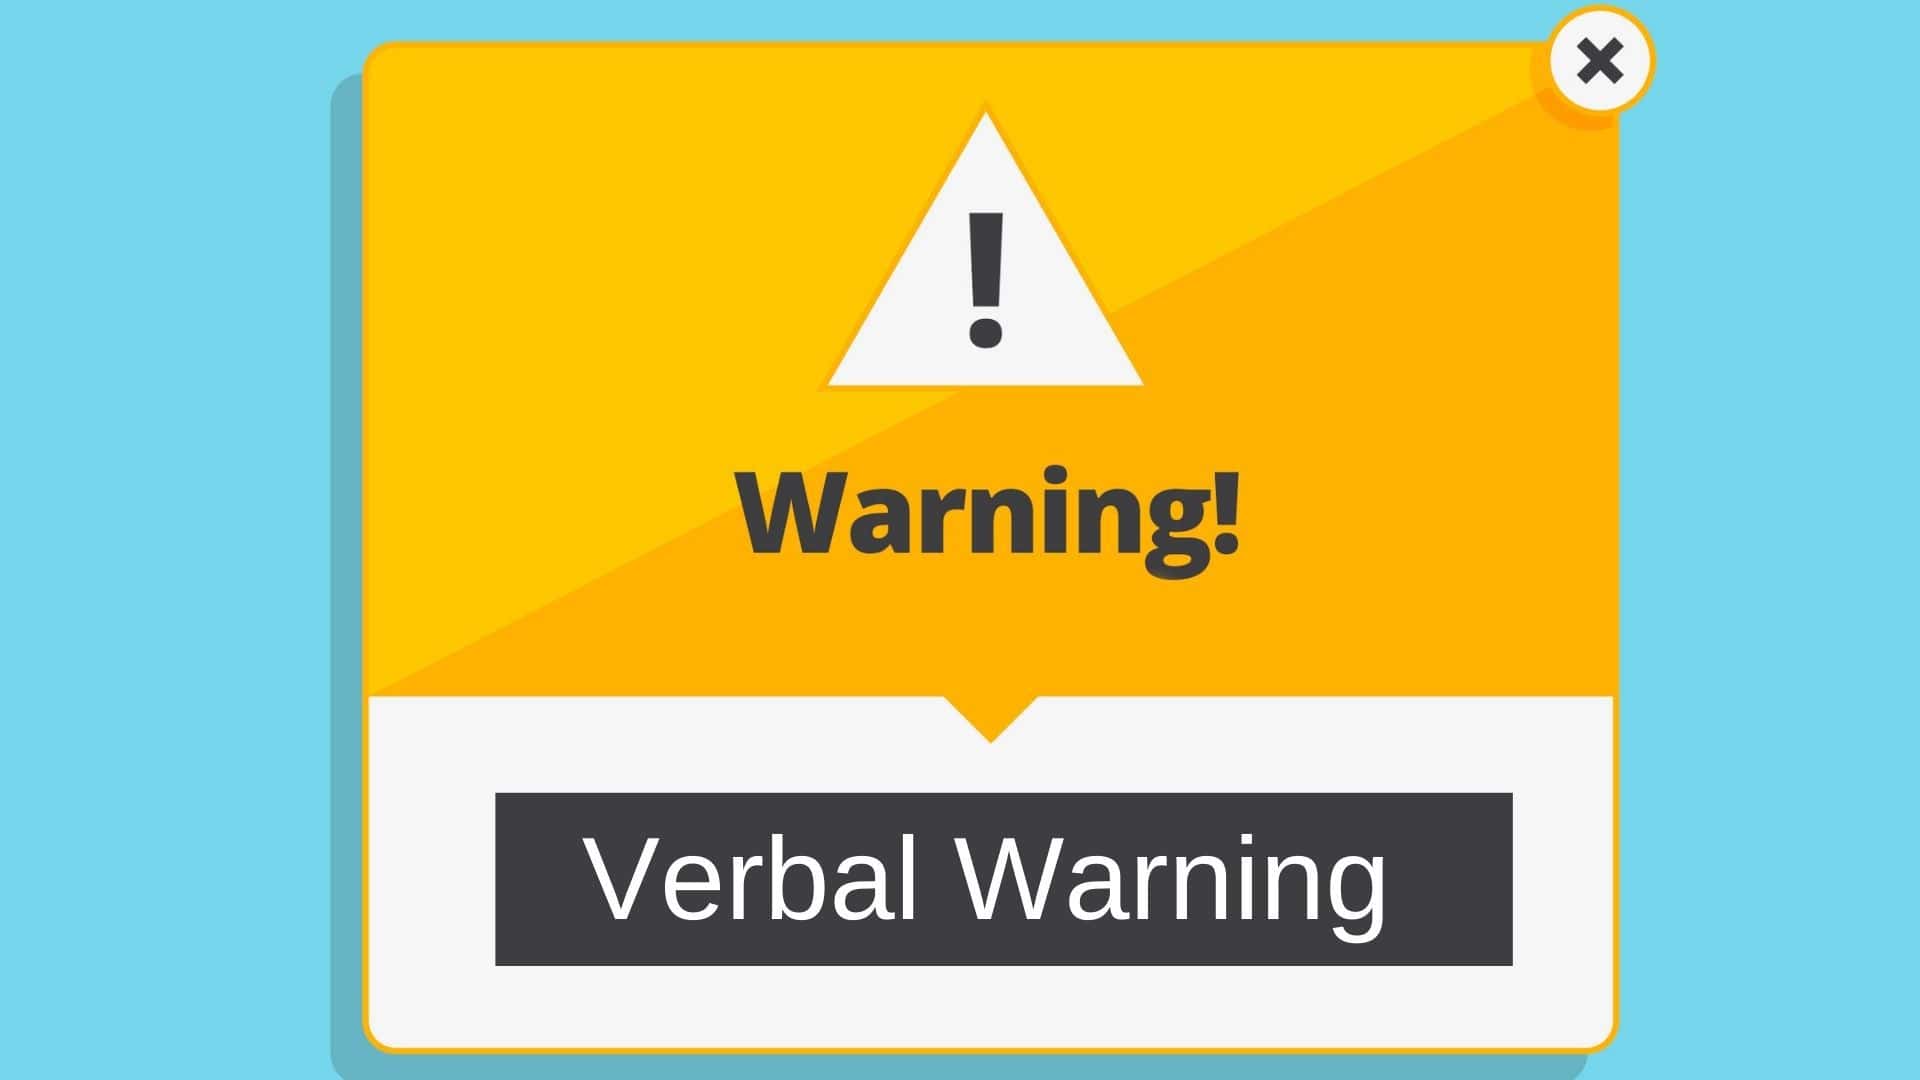 DOS AND DON’TS WHEN ISSUING A VERBAL WARNING